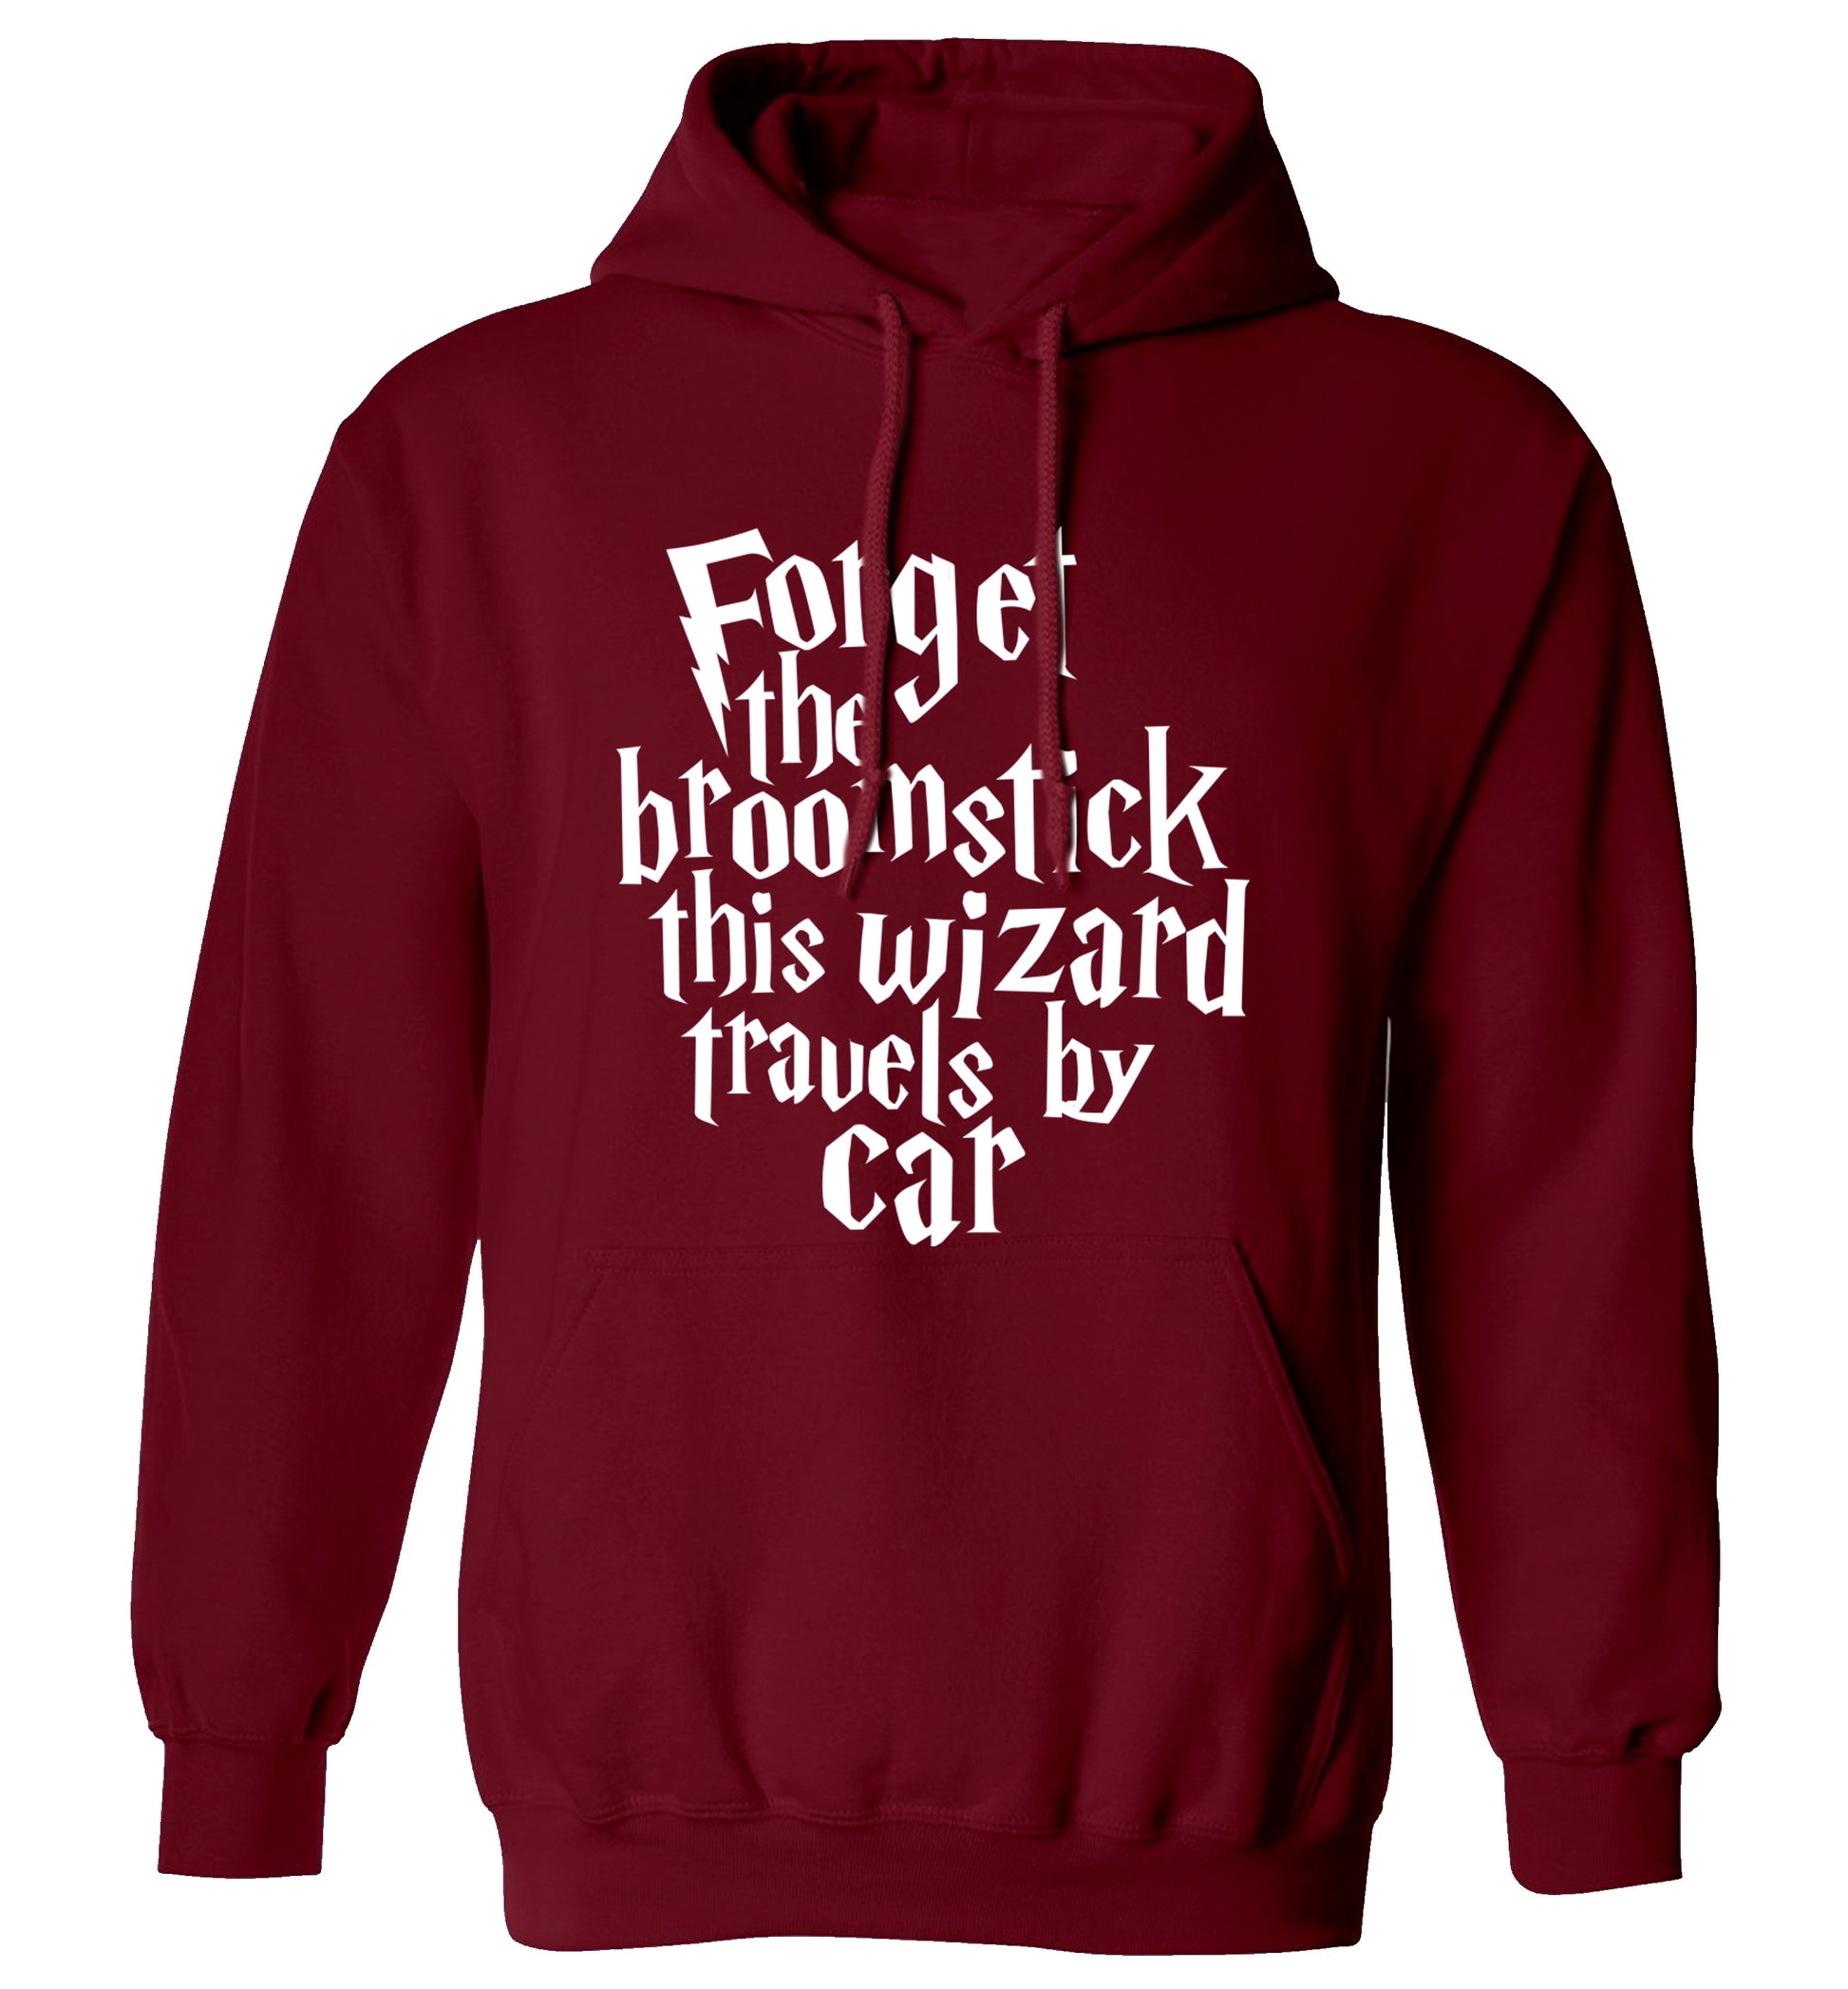 Forget the broomstick this wizard travels by car adults unisexmaroon hoodie 2XL